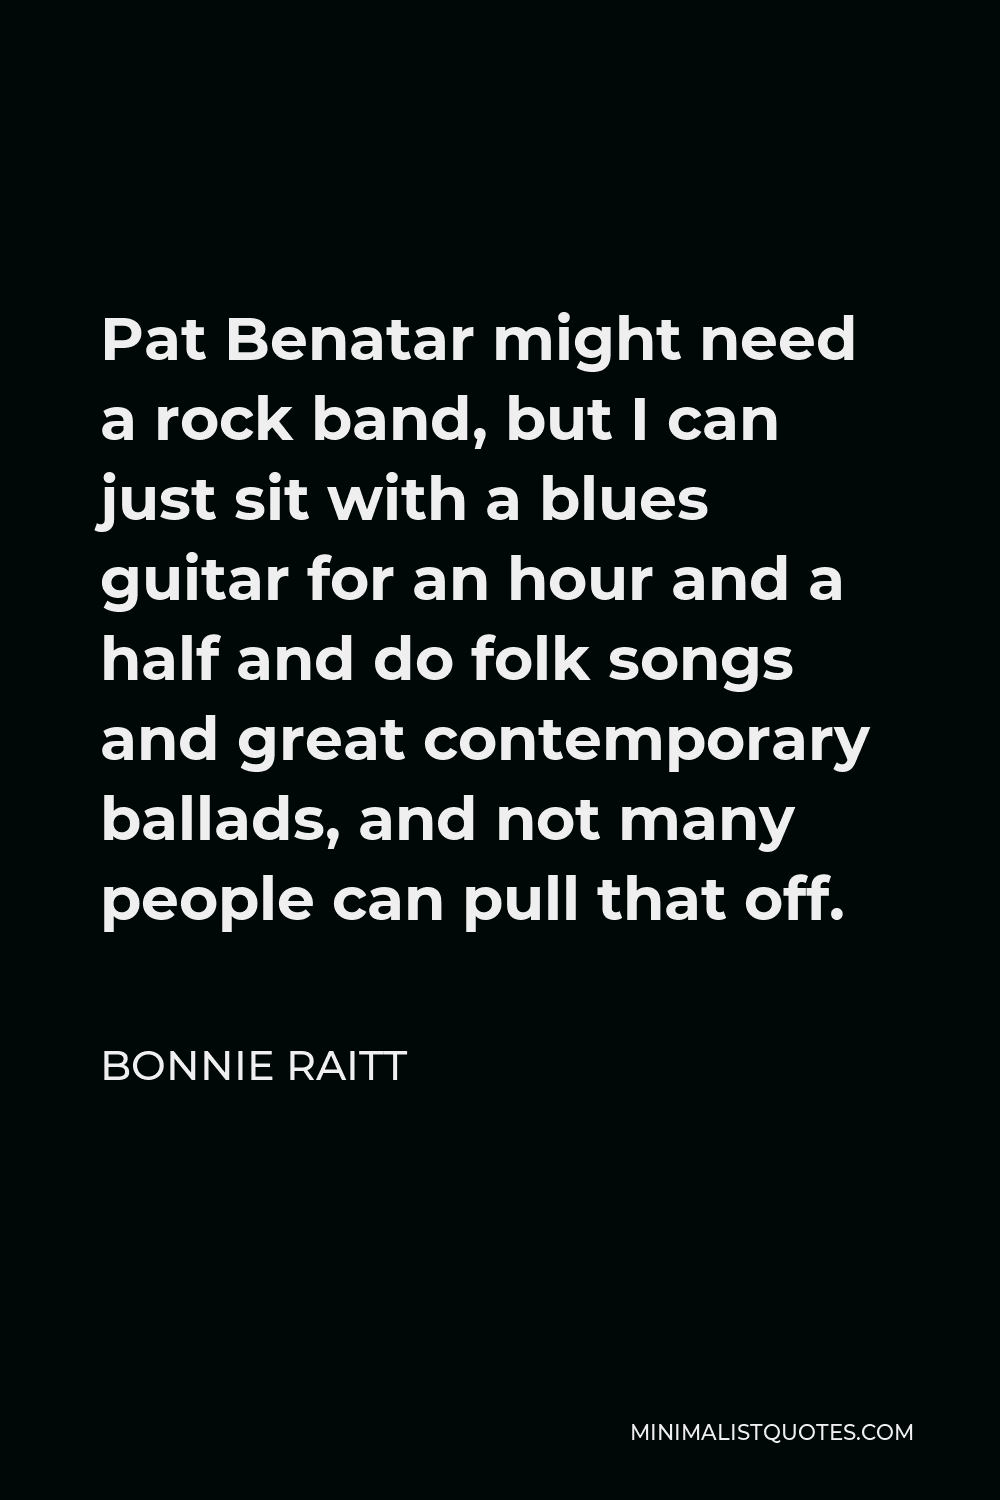 Bonnie Raitt Quote - Pat Benatar might need a rock band, but I can just sit with a blues guitar for an hour and a half and do folk songs and great contemporary ballads, and not many people can pull that off.